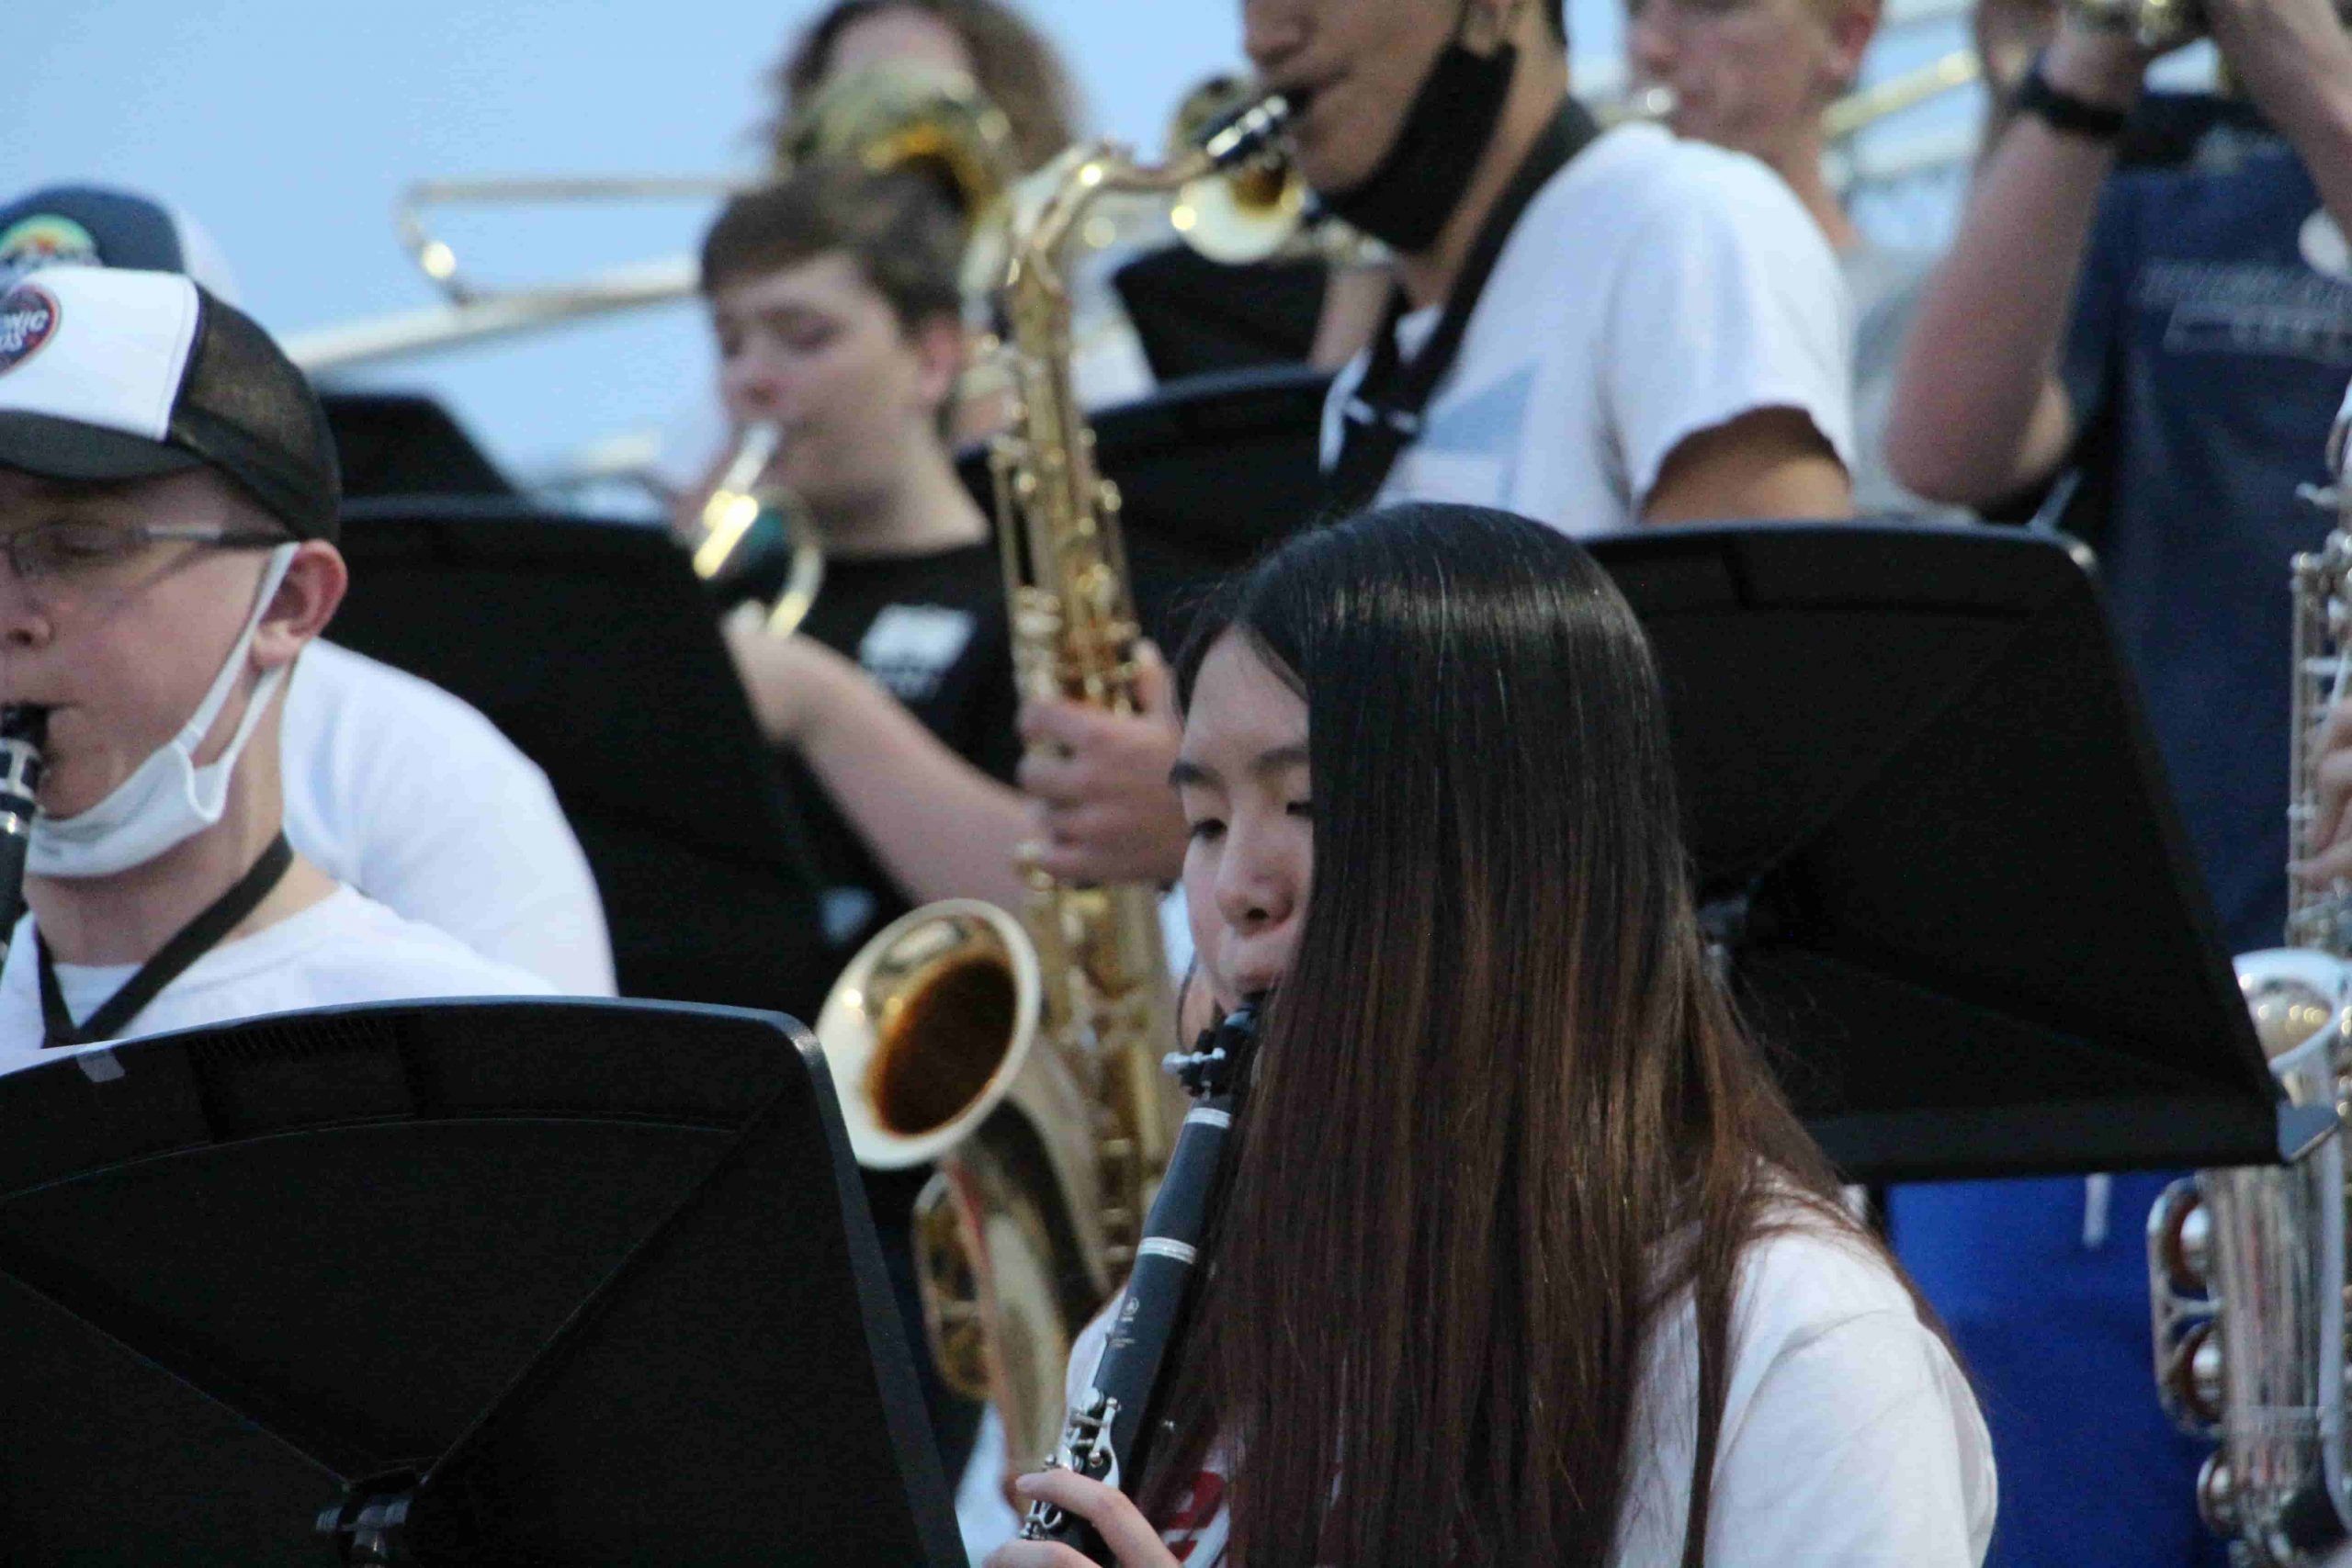 Band students playing instruments